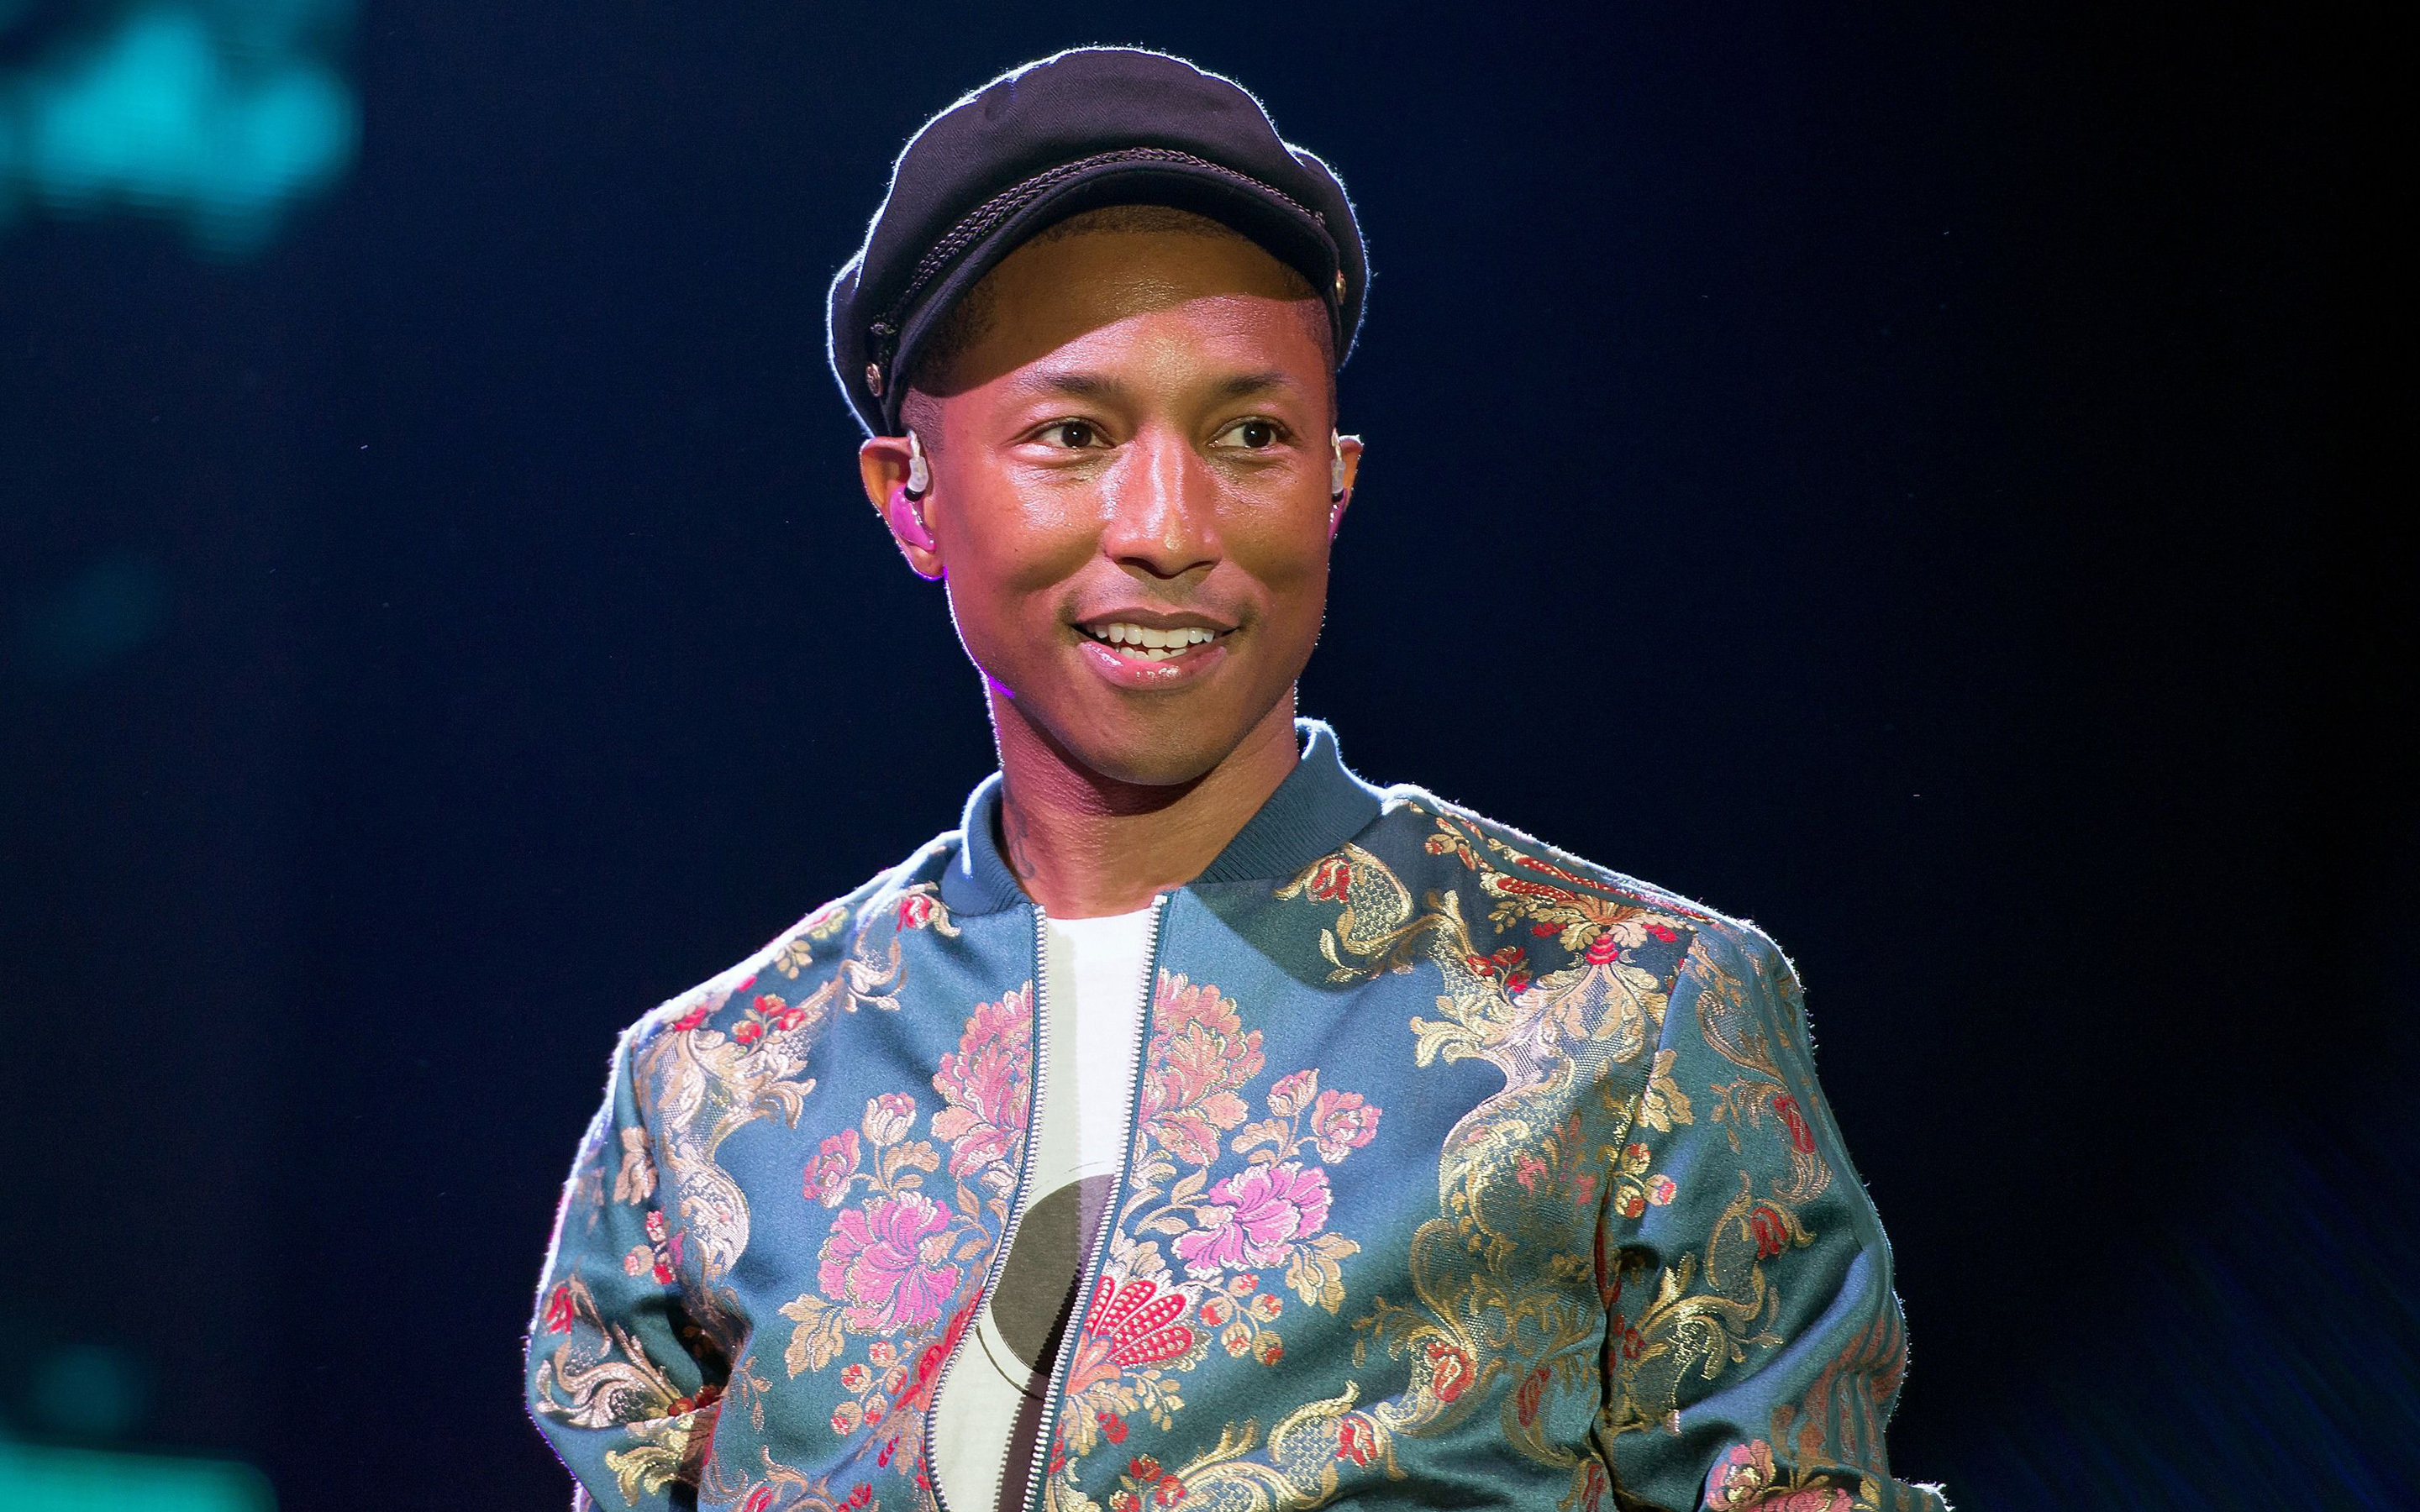 Download wallpaper Pharrell Williams, American singer, portrait, famous singers for desktop with resolution 2880x1800. High Quality HD picture wallpaper